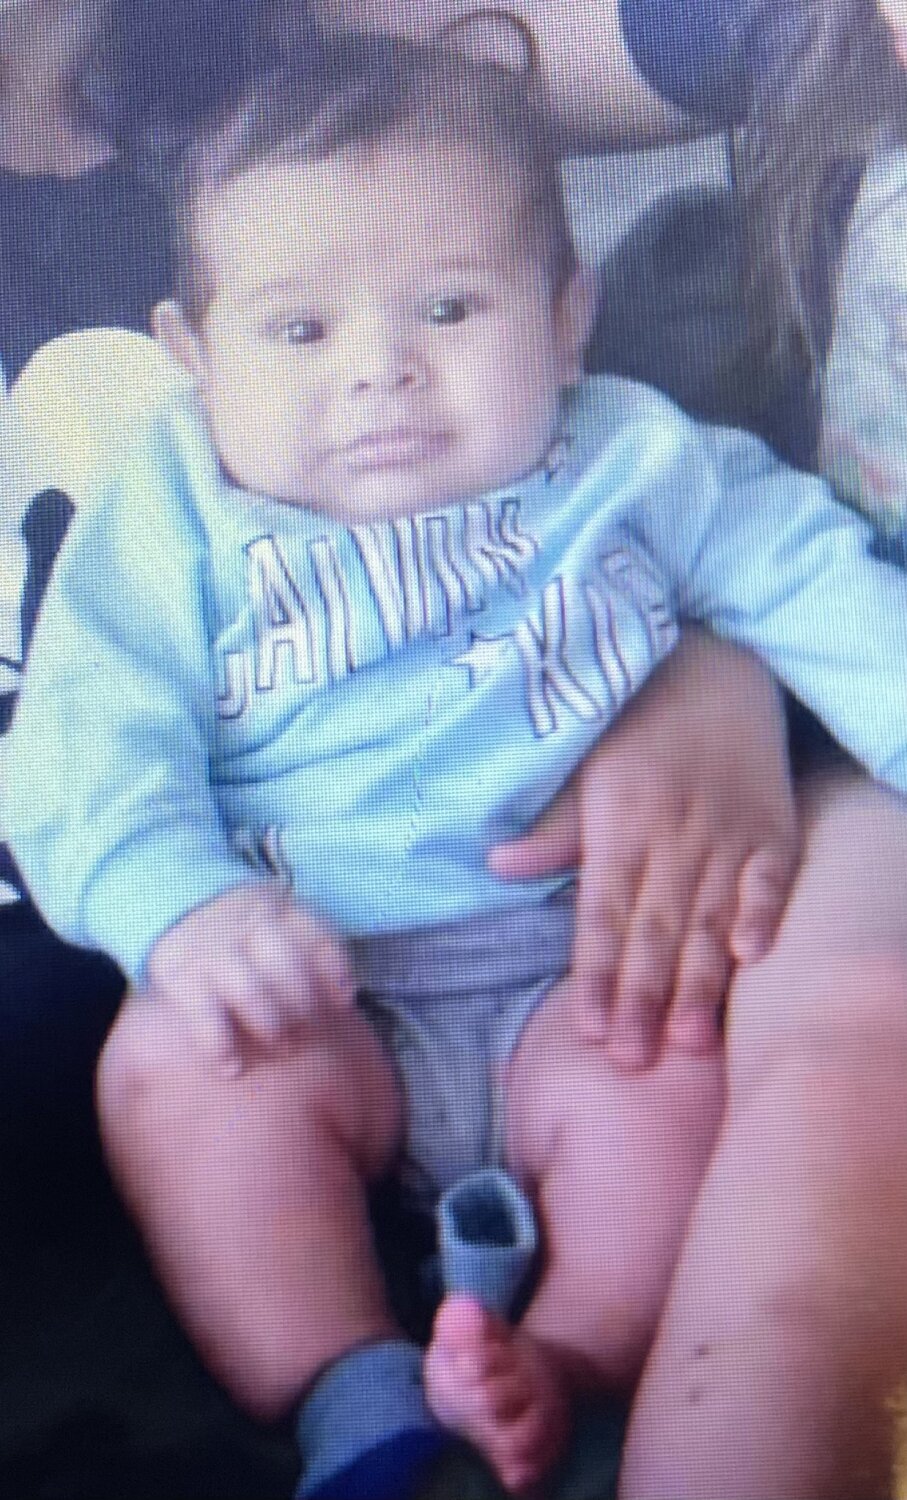 3-month-old Baby Brandon found safe after kidnapping from San Jose apartment